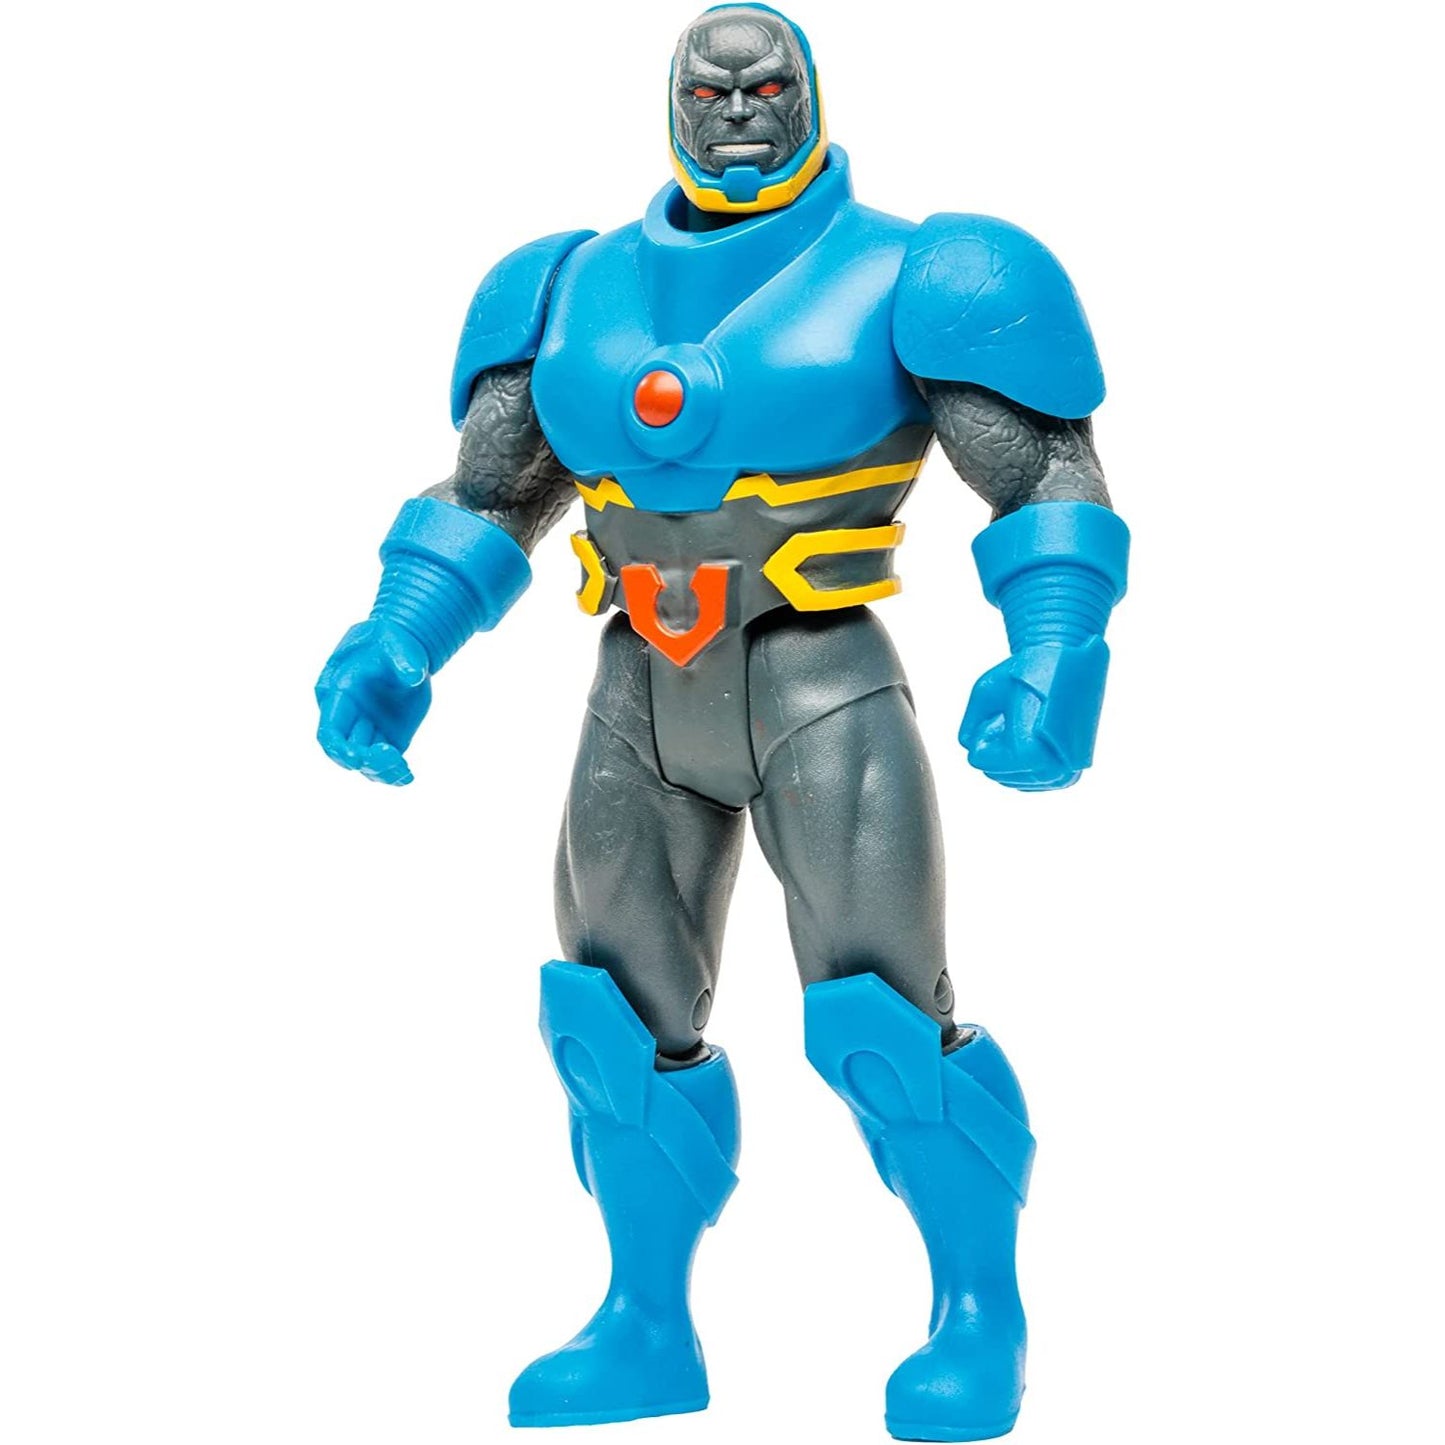 DC Direct - Super Powers - Darkseid Action Figure Toy - Heretoserveyou